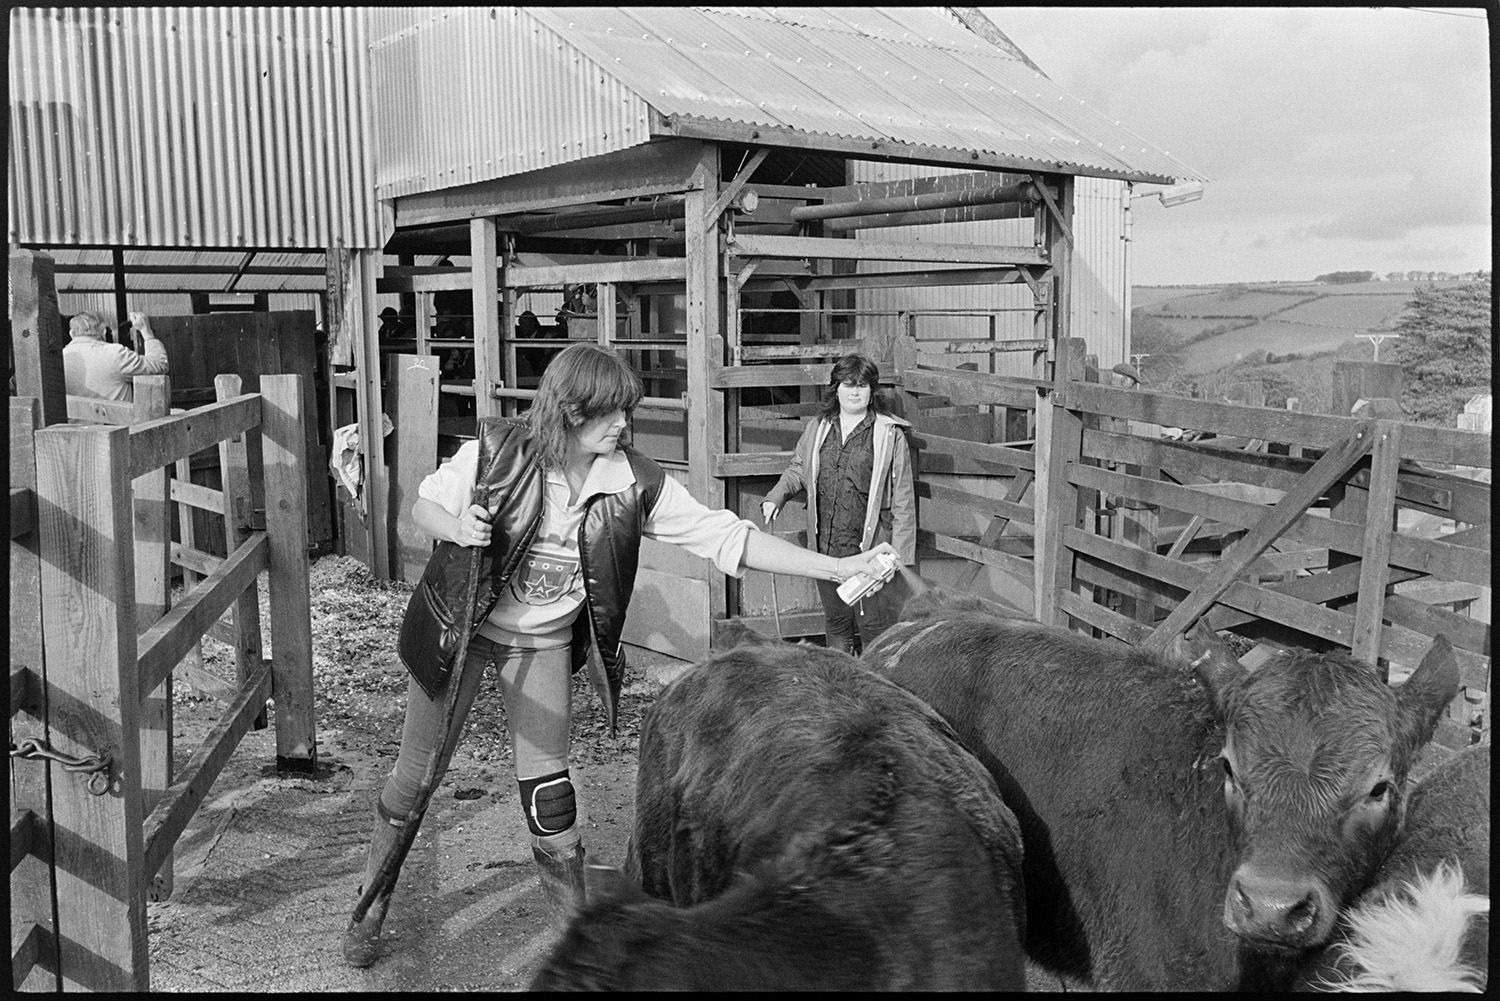 Ring at cattle market, farmers bidding, auctioneers in box. 
[A woman working at a cattle market near Wheddon Cross. She is spraying two cows in a pen.]